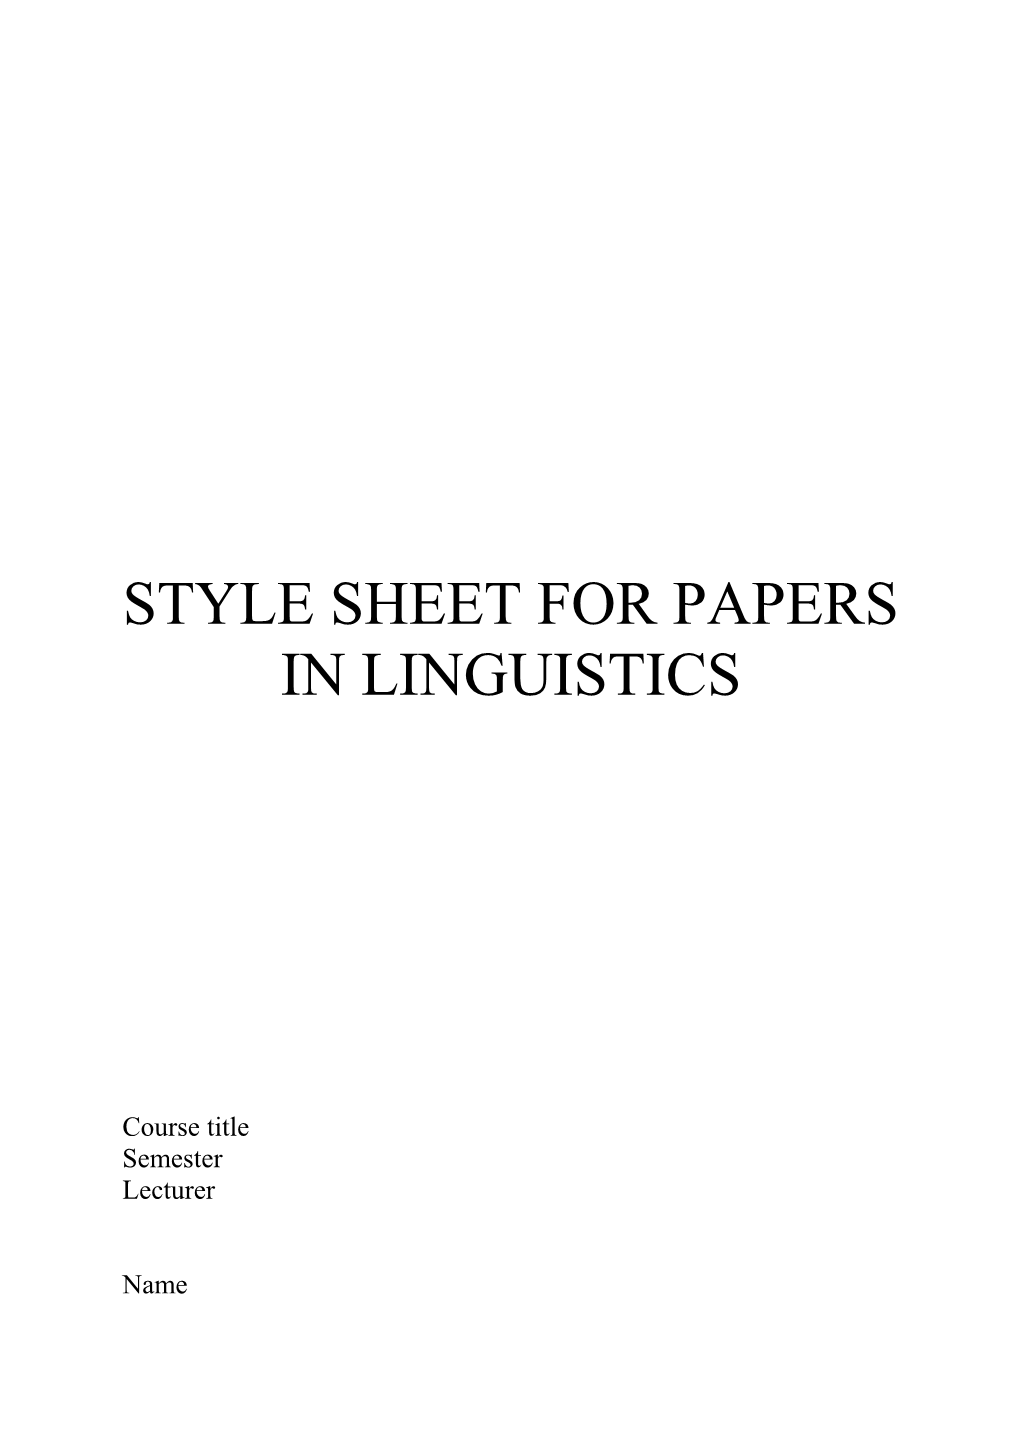 Style Sheet for Papers in Linguistics